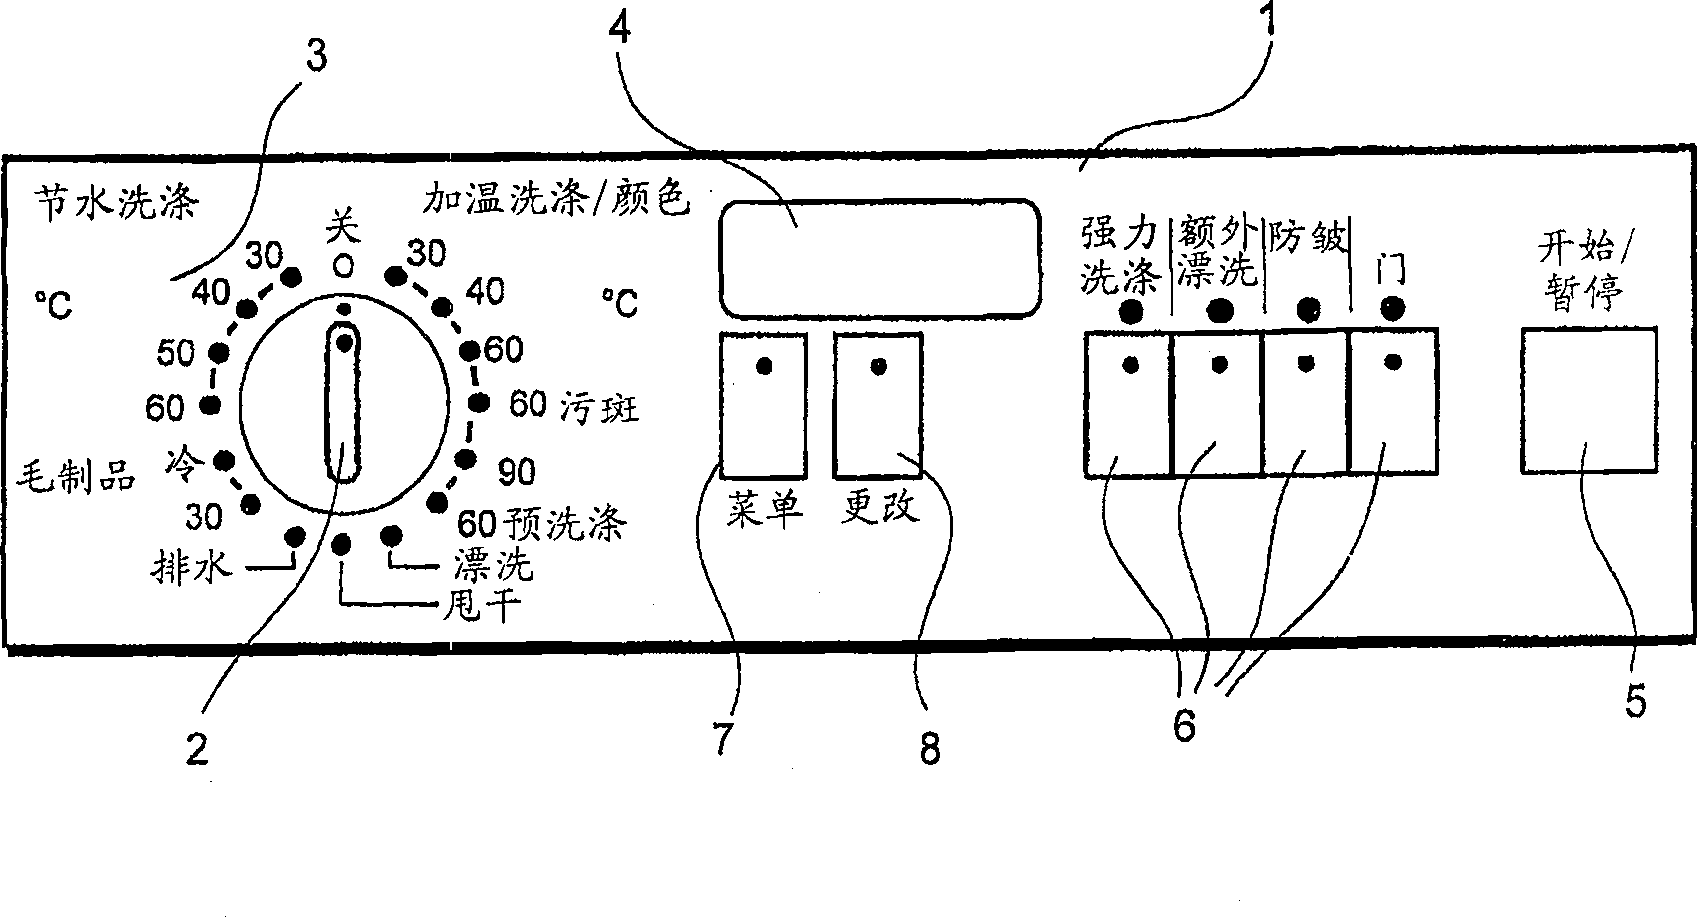 Method for operating a program-controlled household appliance